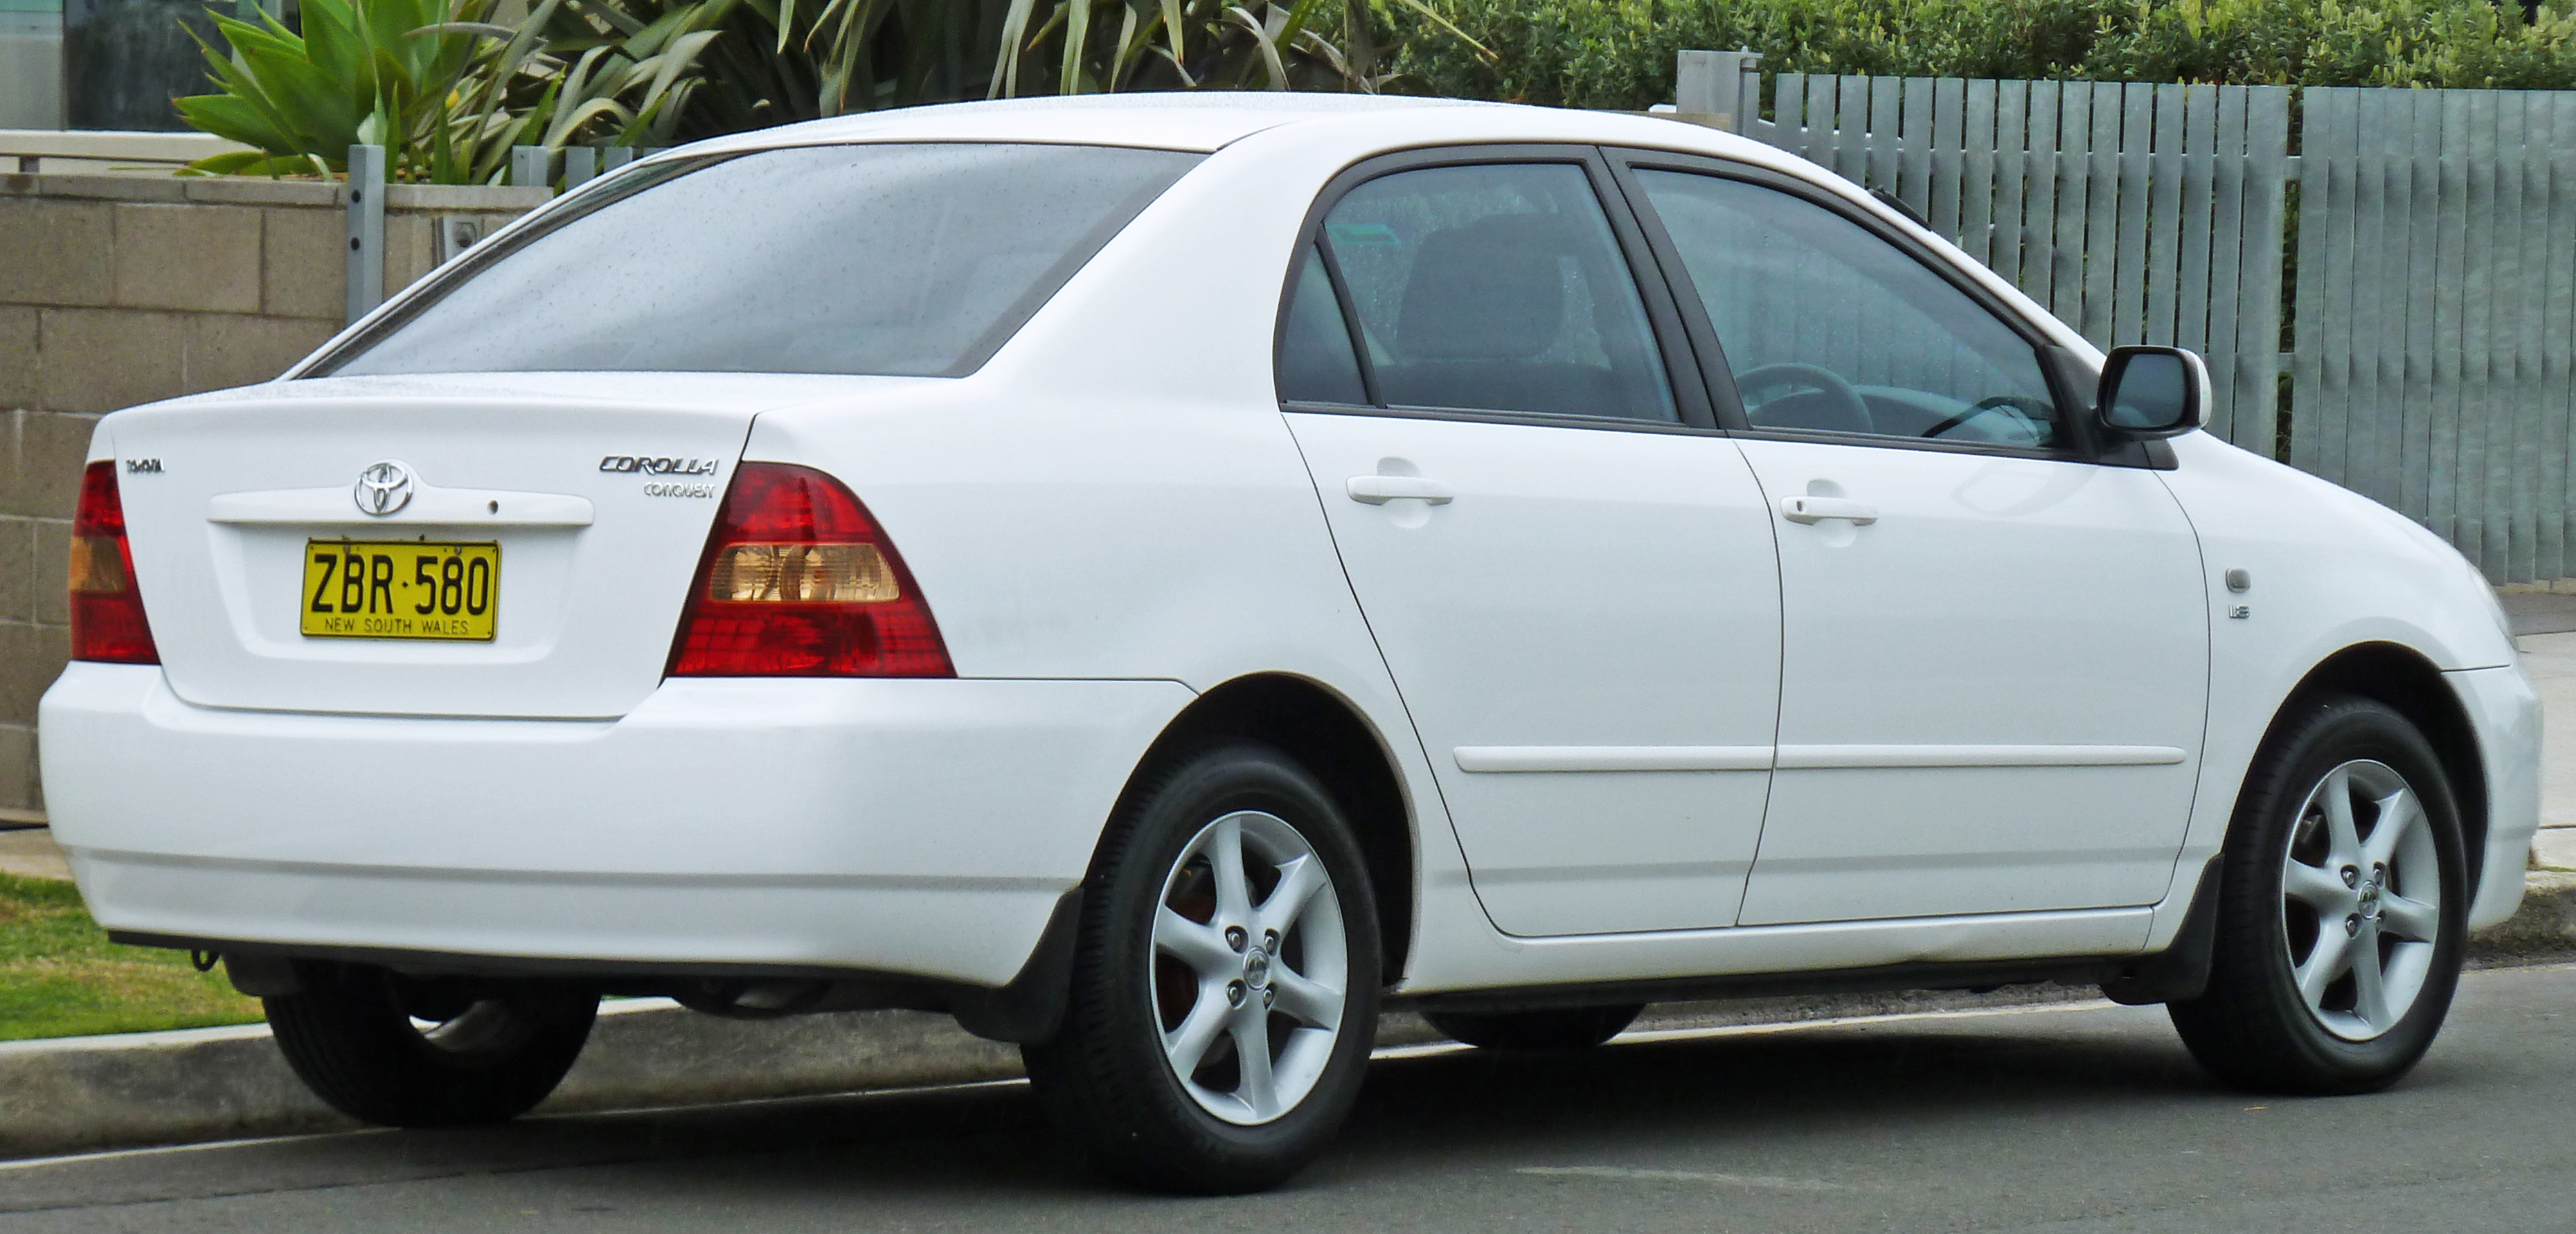 Toyota Corolla 9th Generation (JDM) Exterior Rear Side View